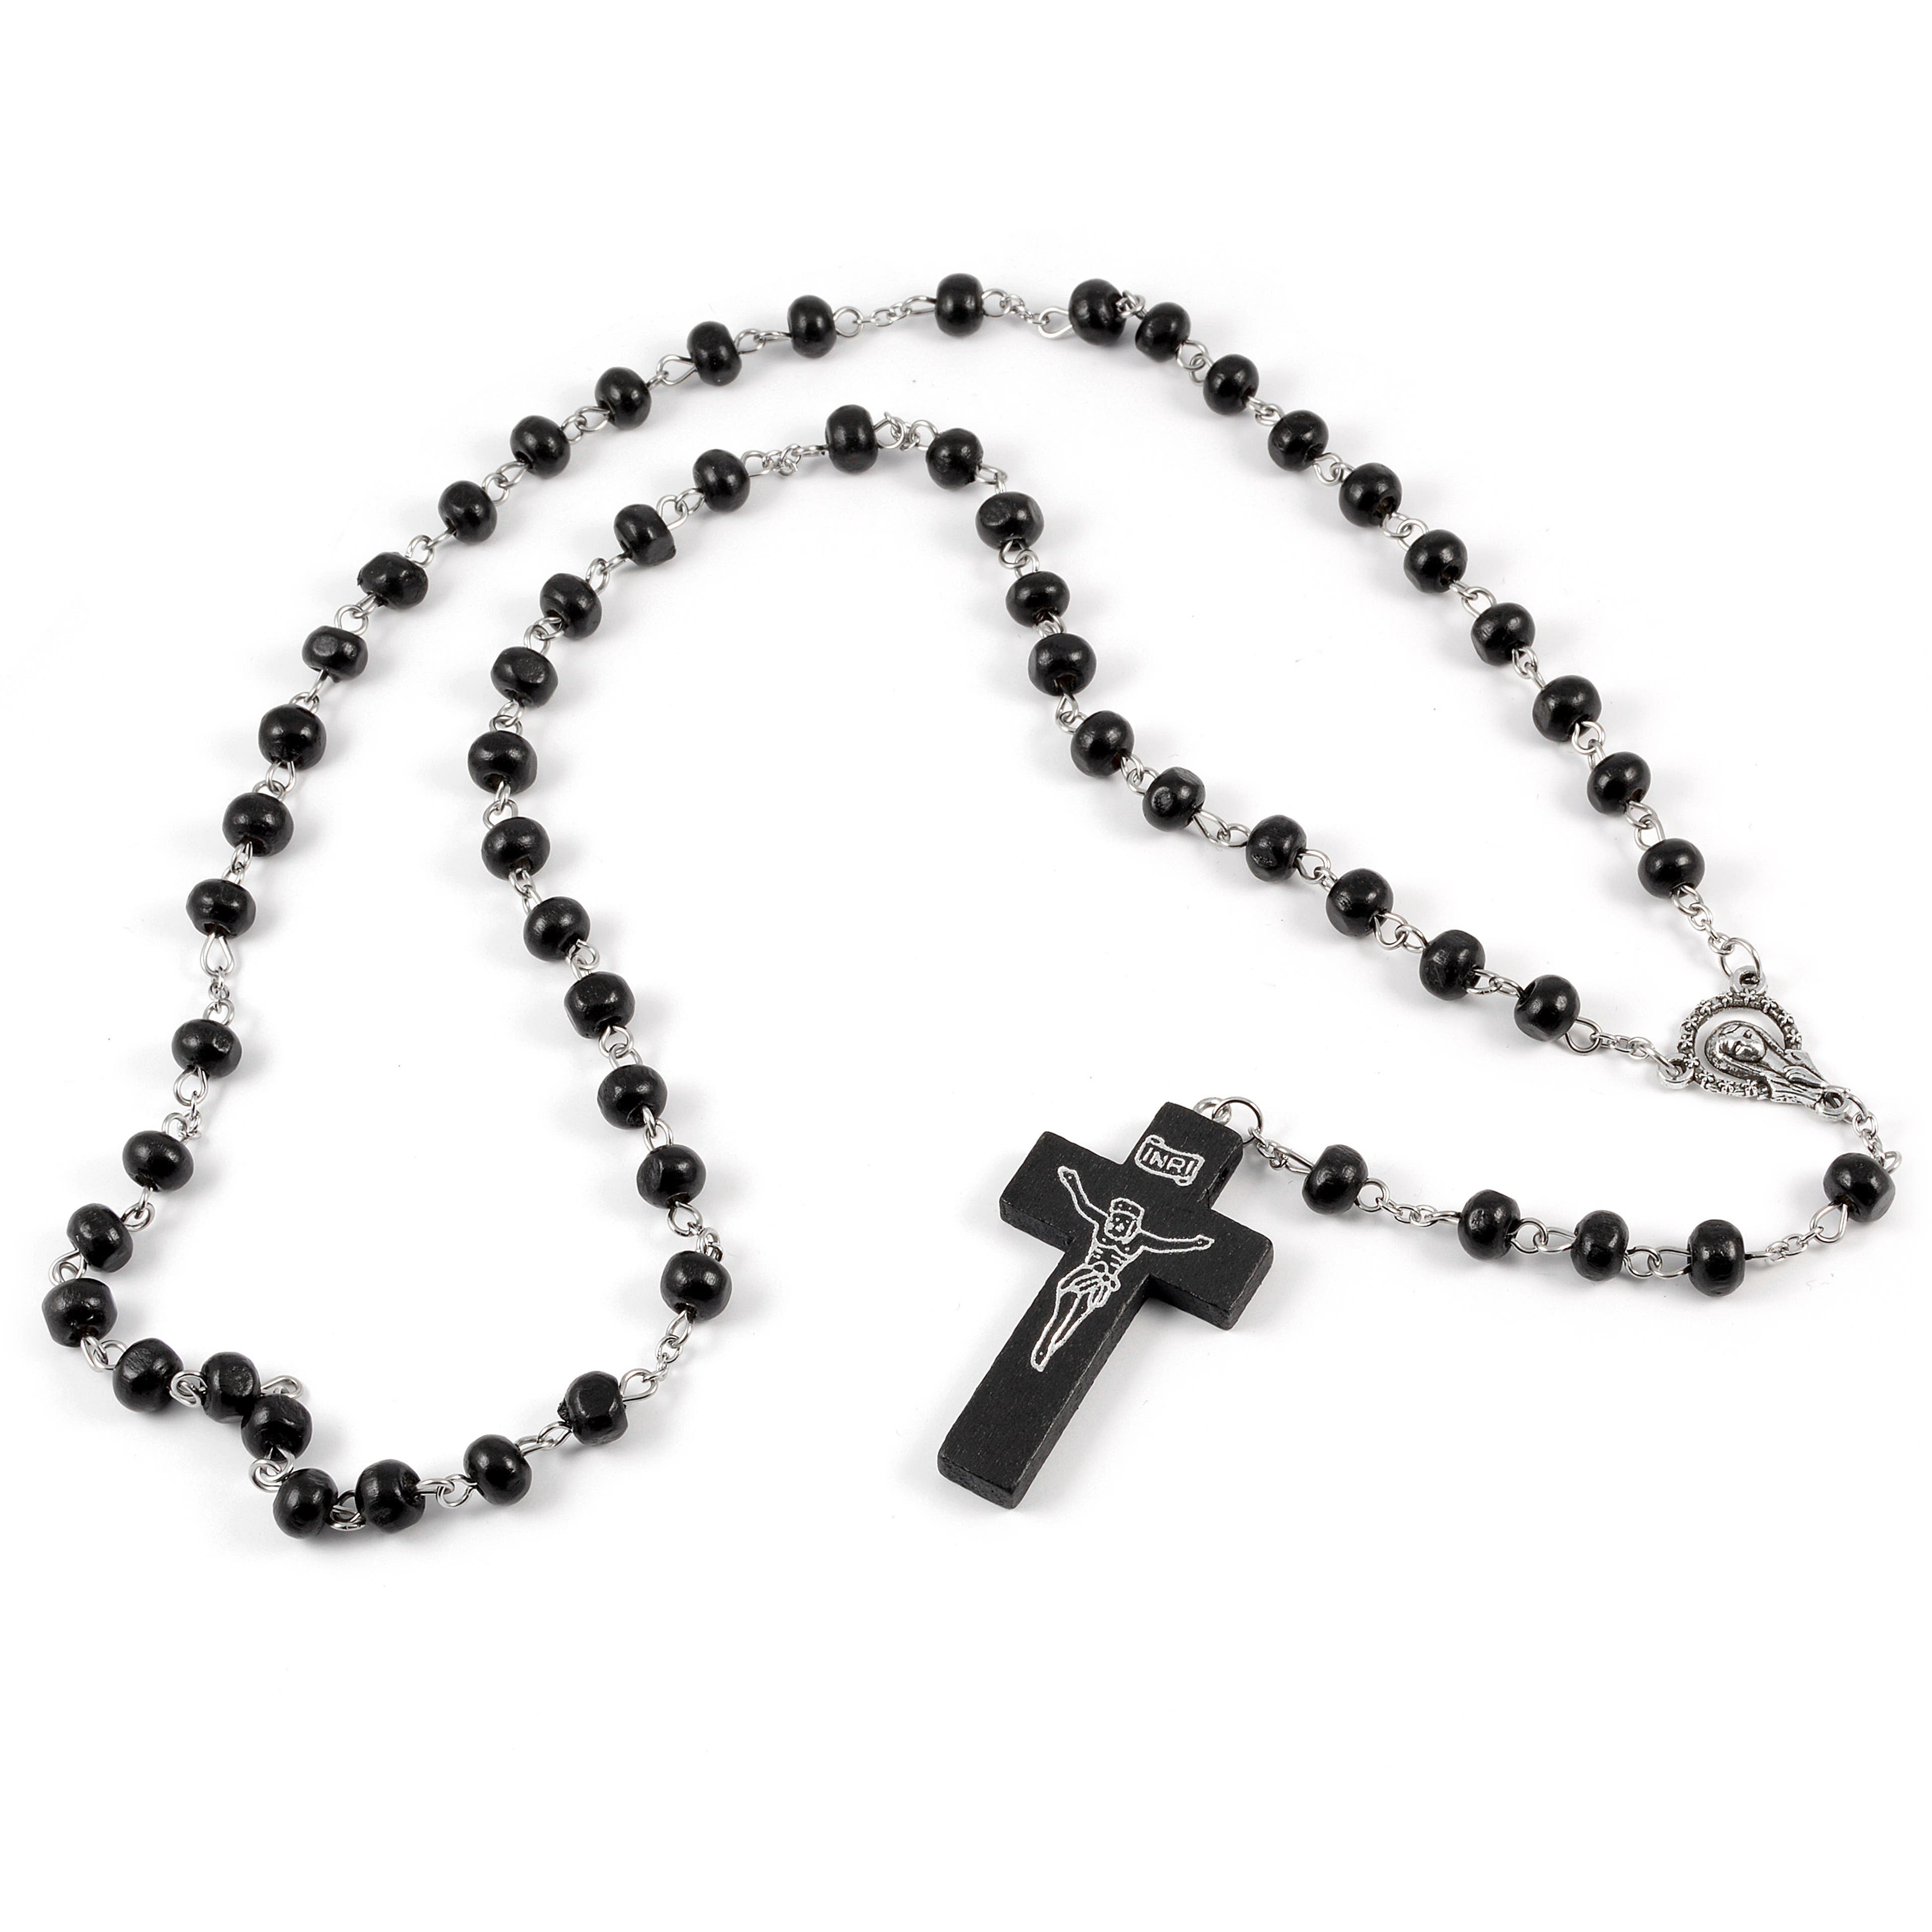 Black Wooden Beaded Rosary Necklace